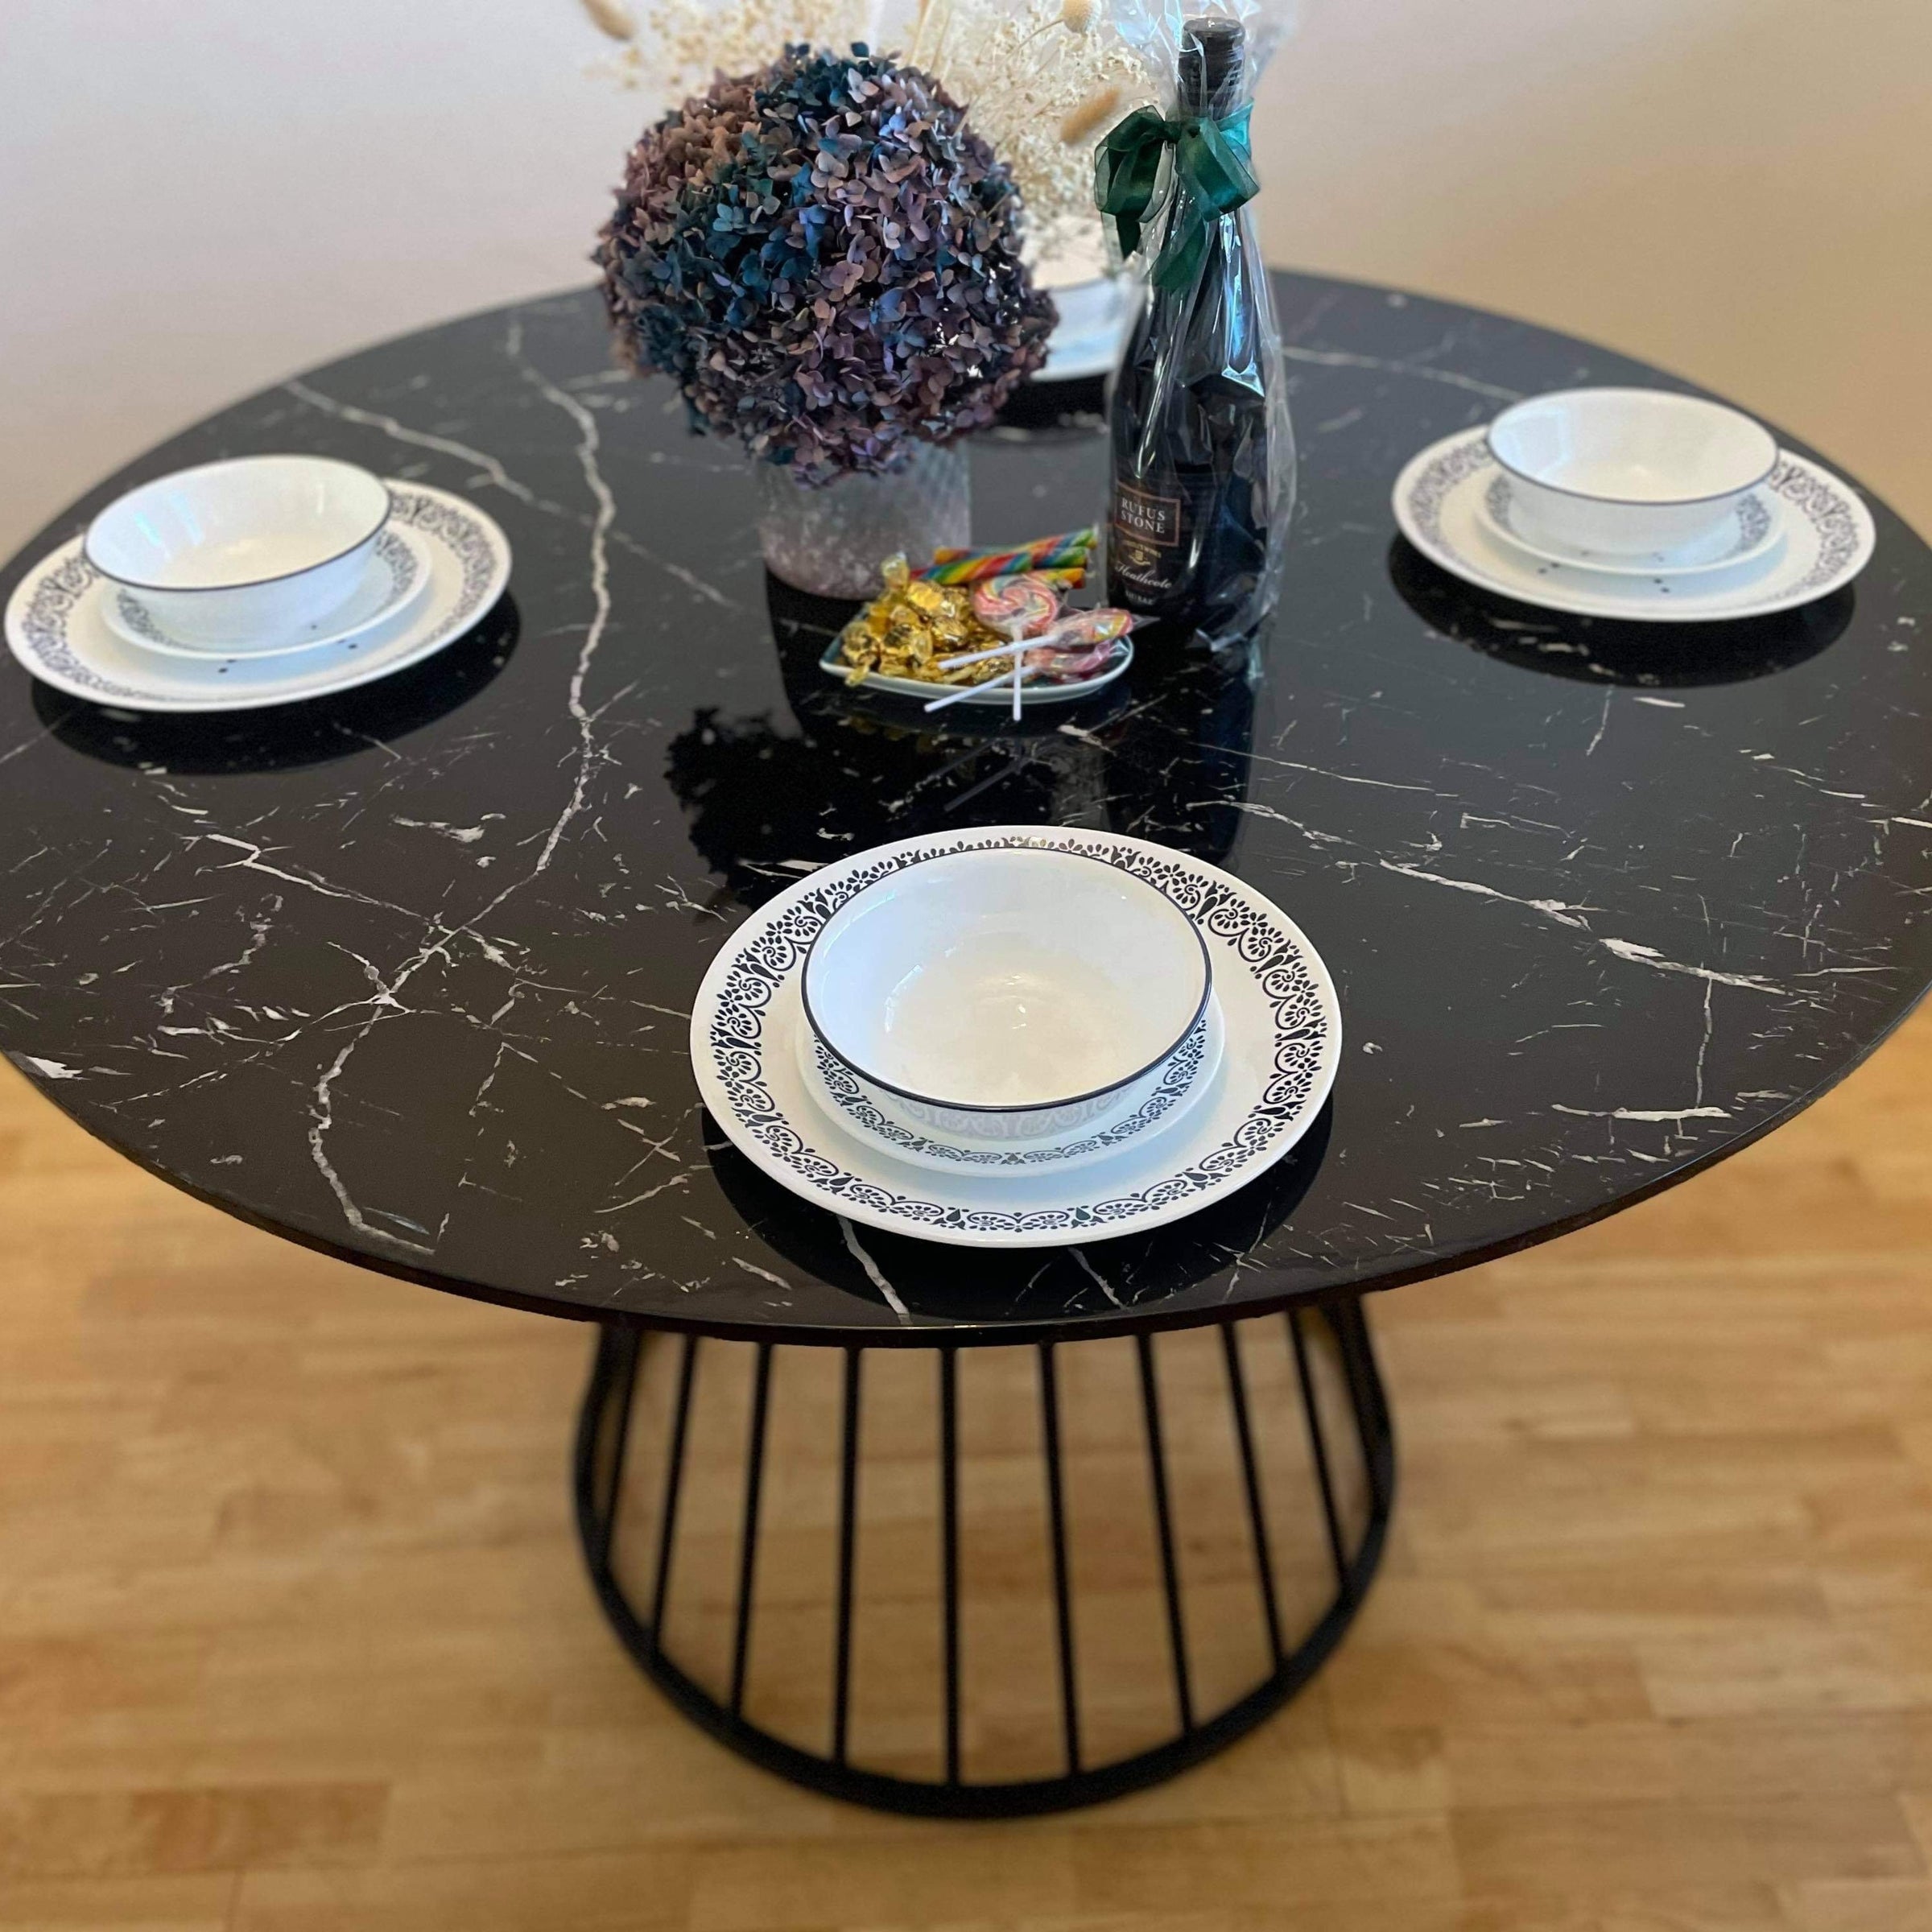 Marble Laminate Dining Table | Black